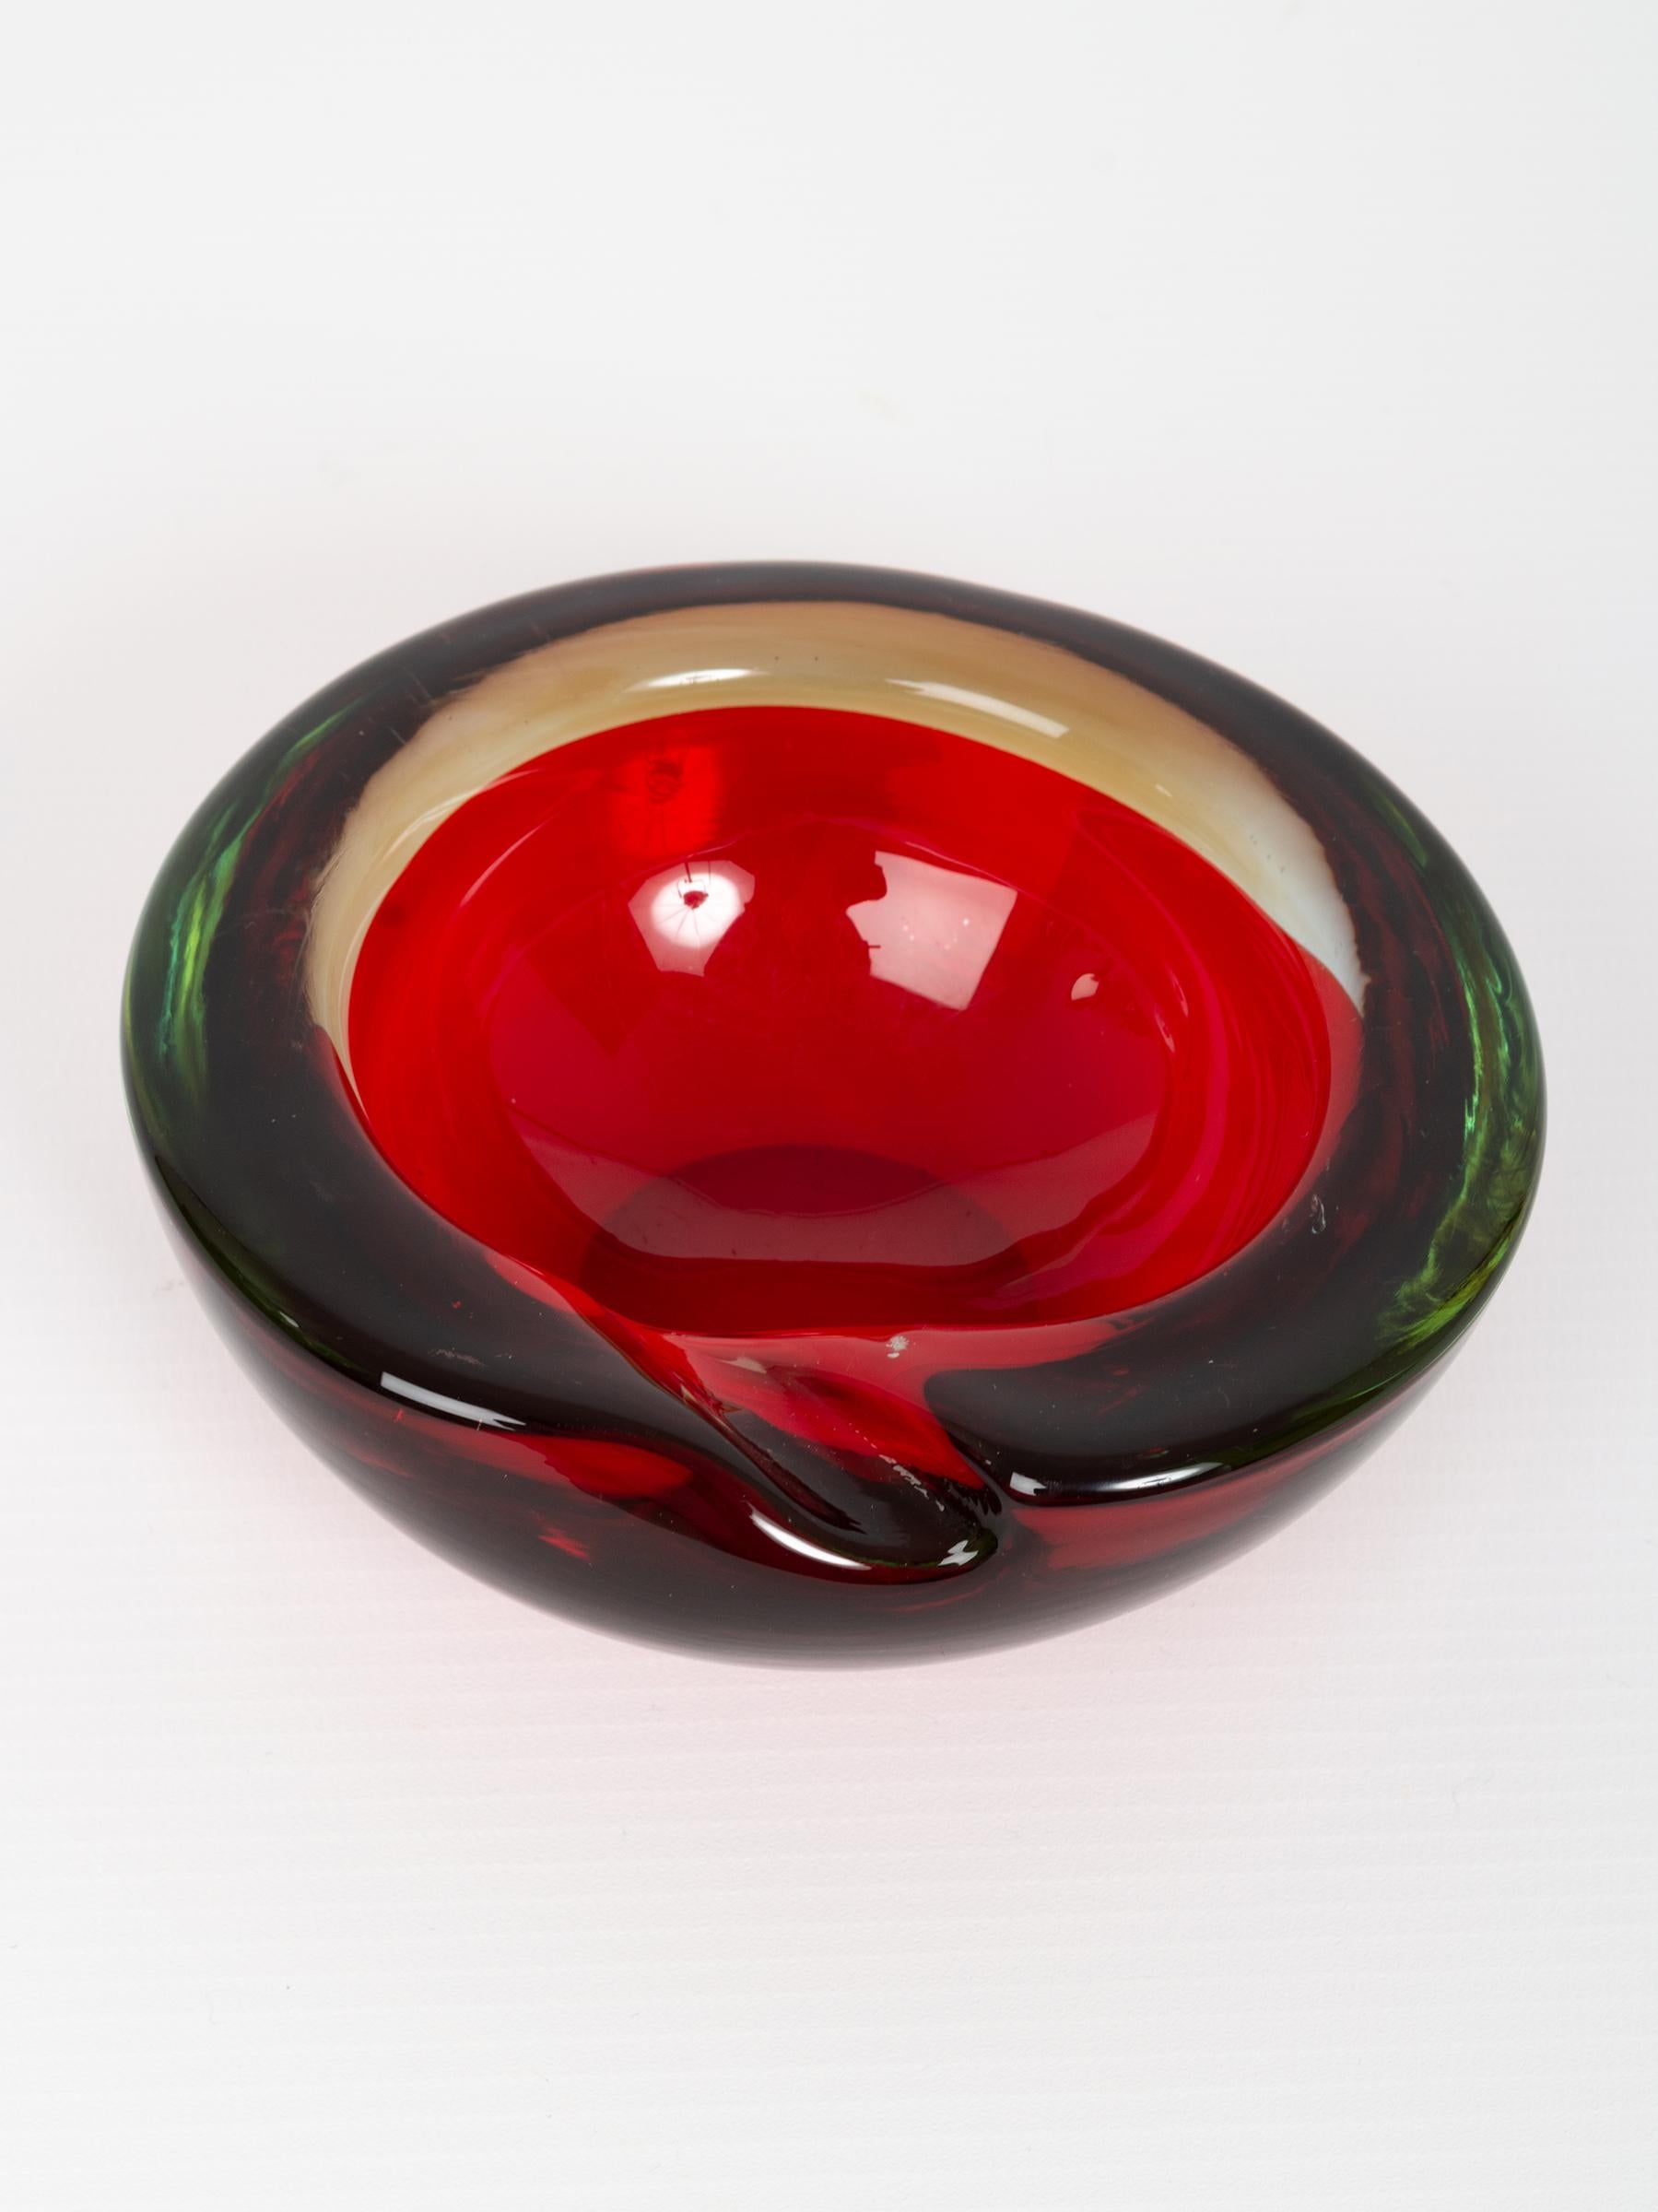 Murano red glass ashtray bowl, Italy, circa 1960.
In very good vintage condition with one small inclusion.
 